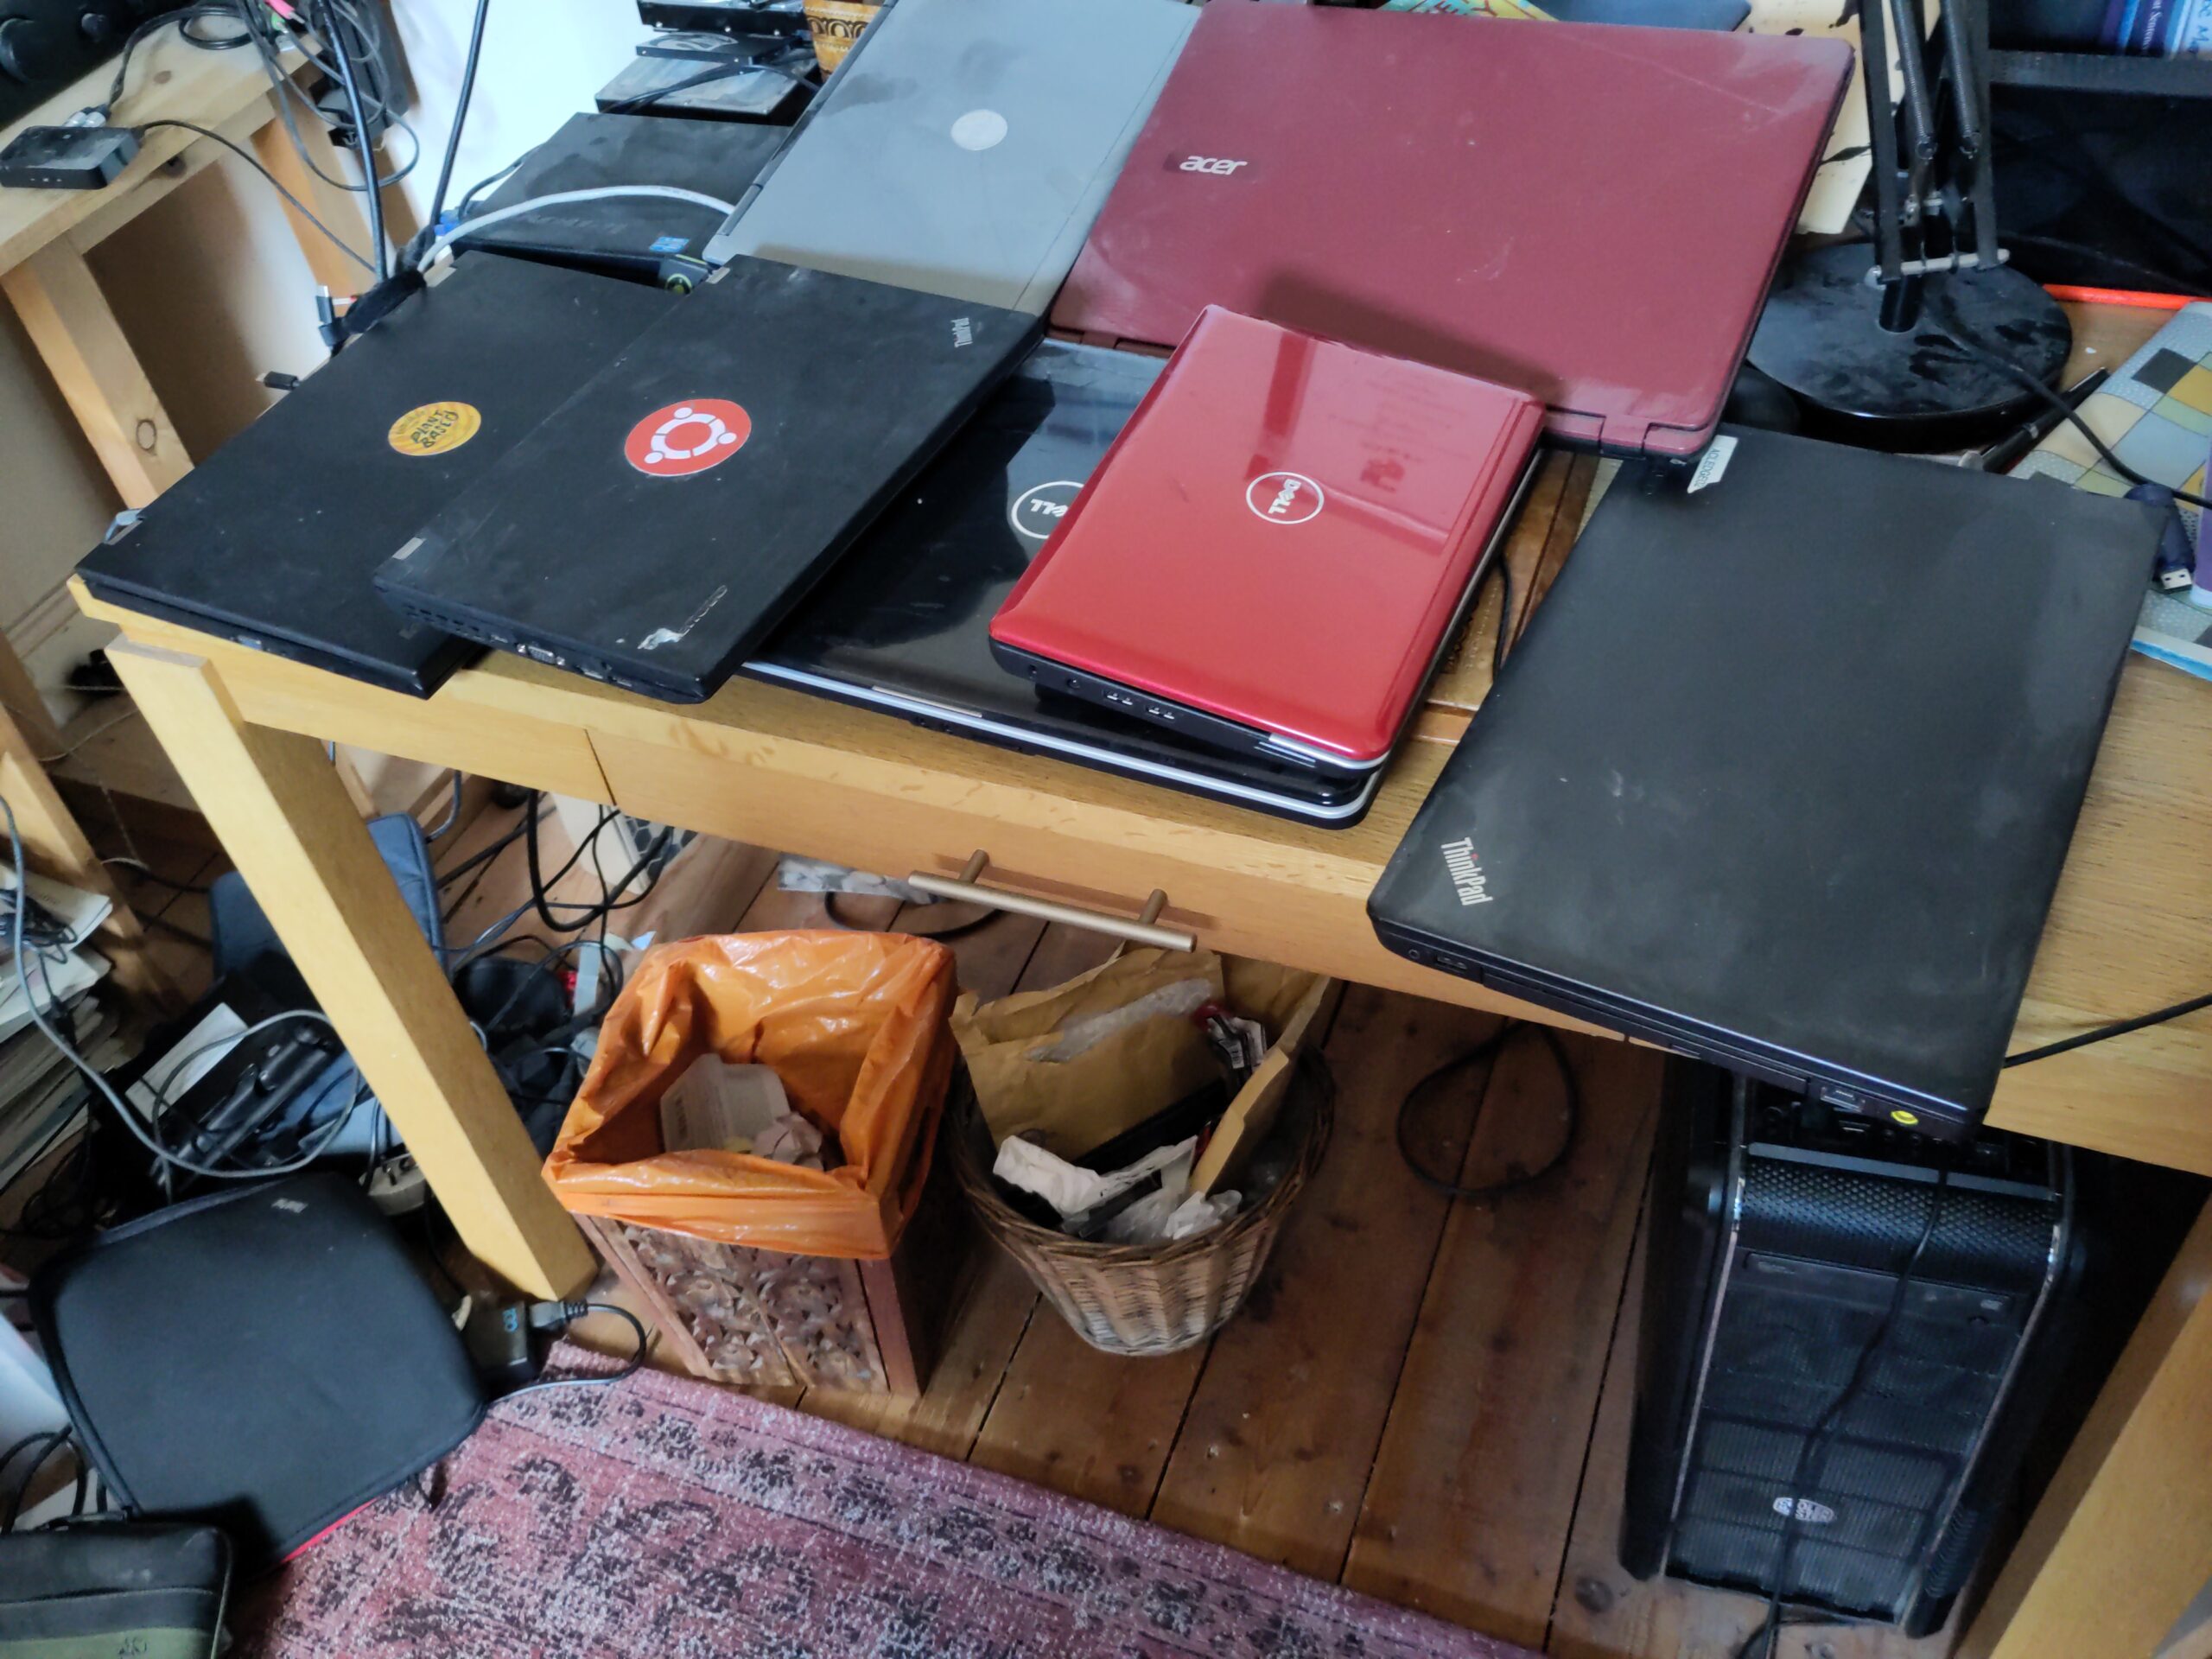 A variety of laptop computers sit on an untidy desk, and a large computer case sits beneath it.